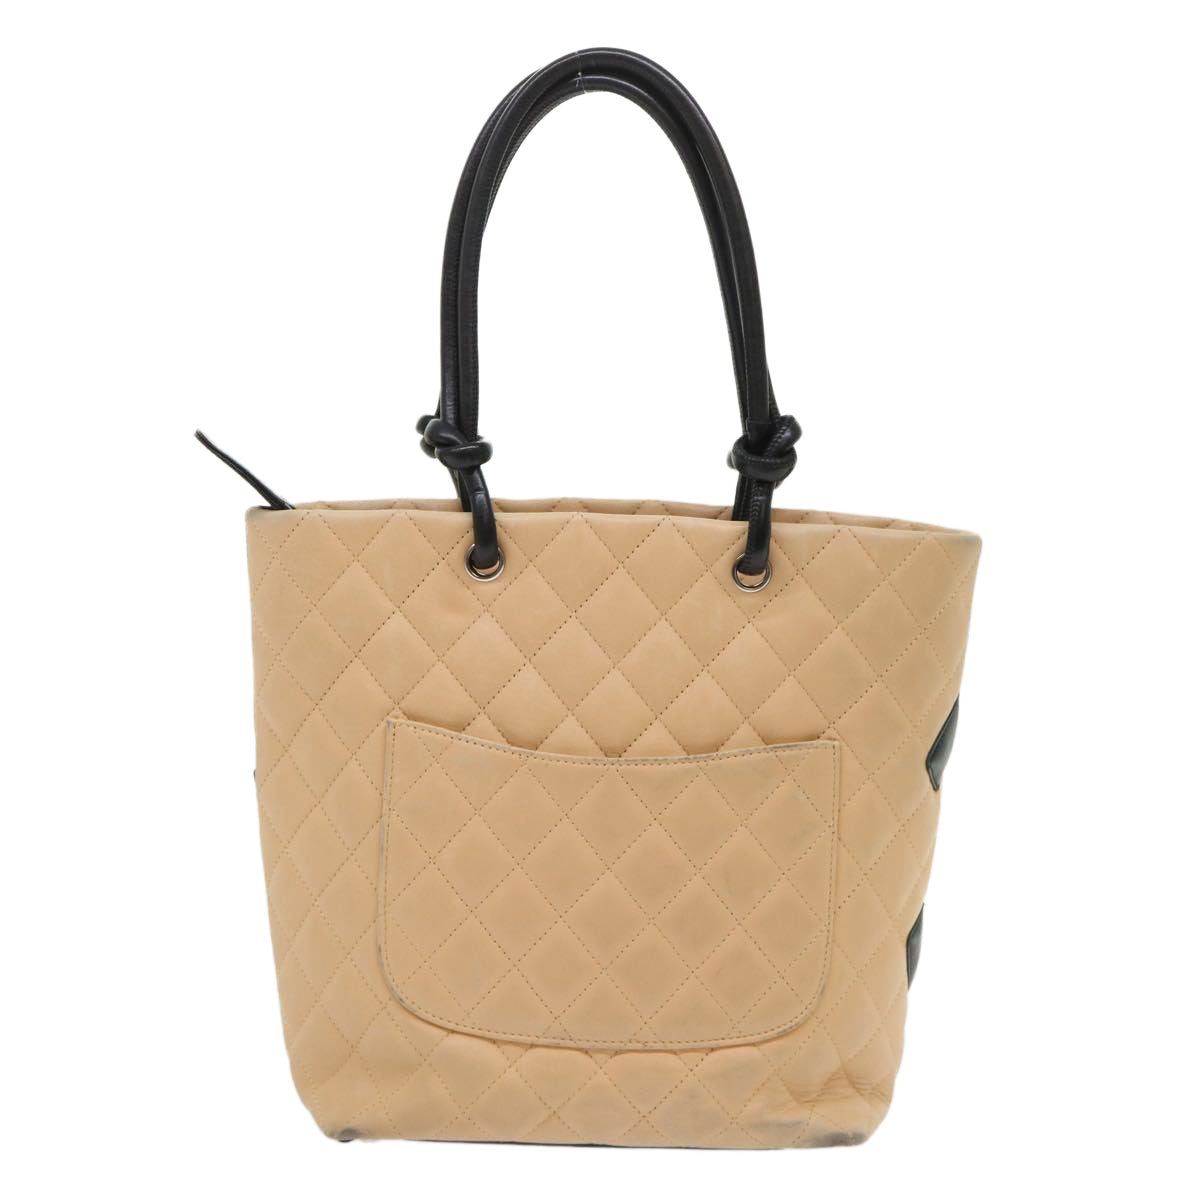 CHANEL Cambon Line Tote Bag Leather Beige CC Auth am4685 - 0